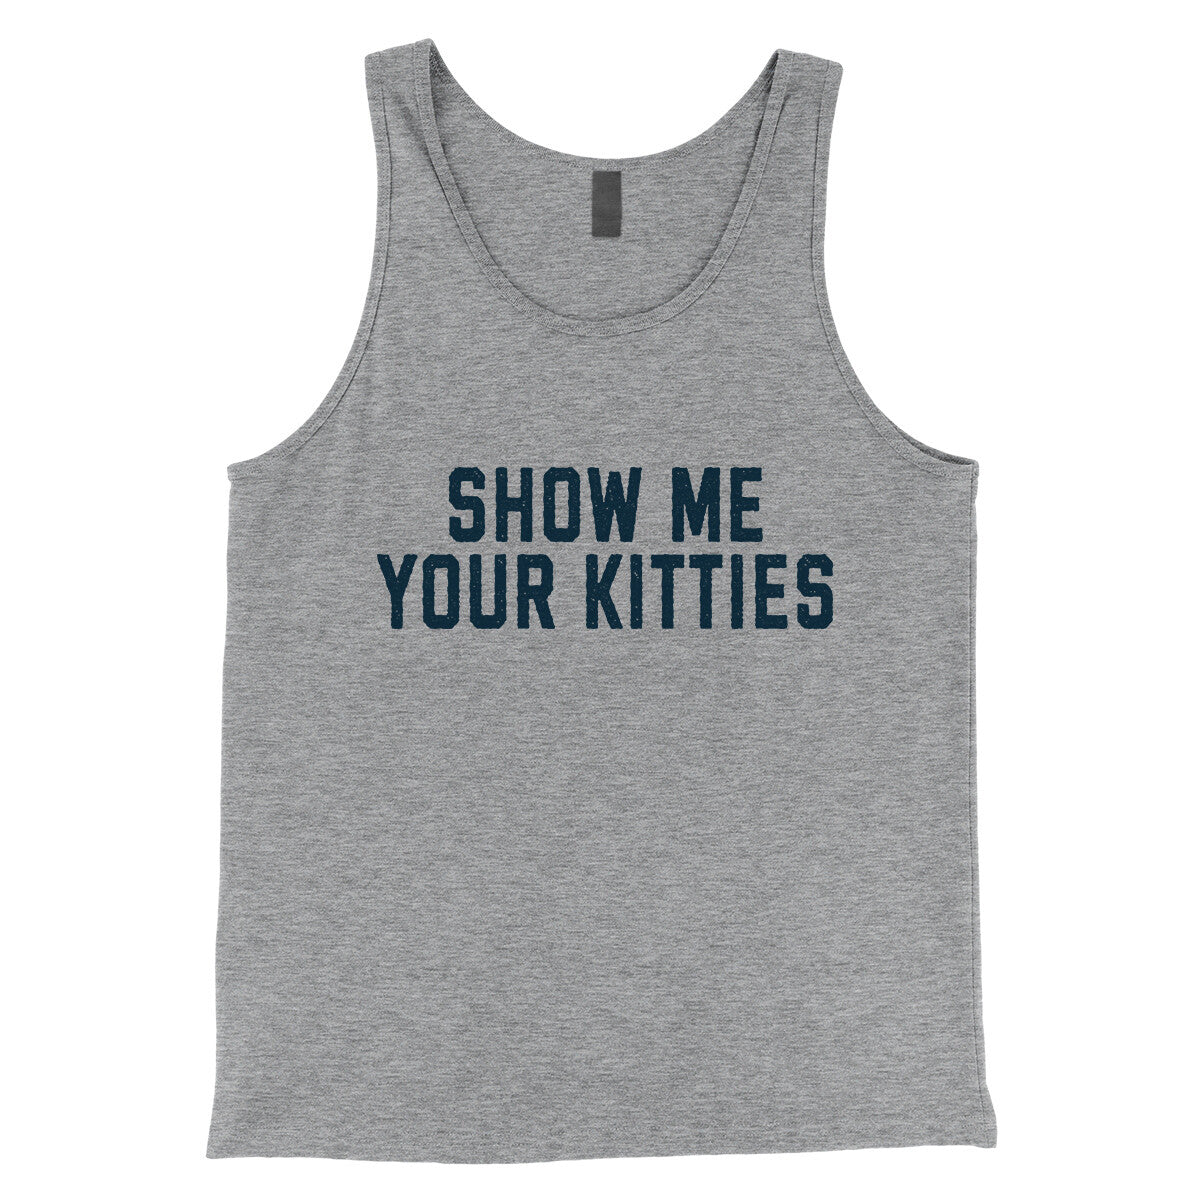 Show me Your Kitties in Athletic Heather Color